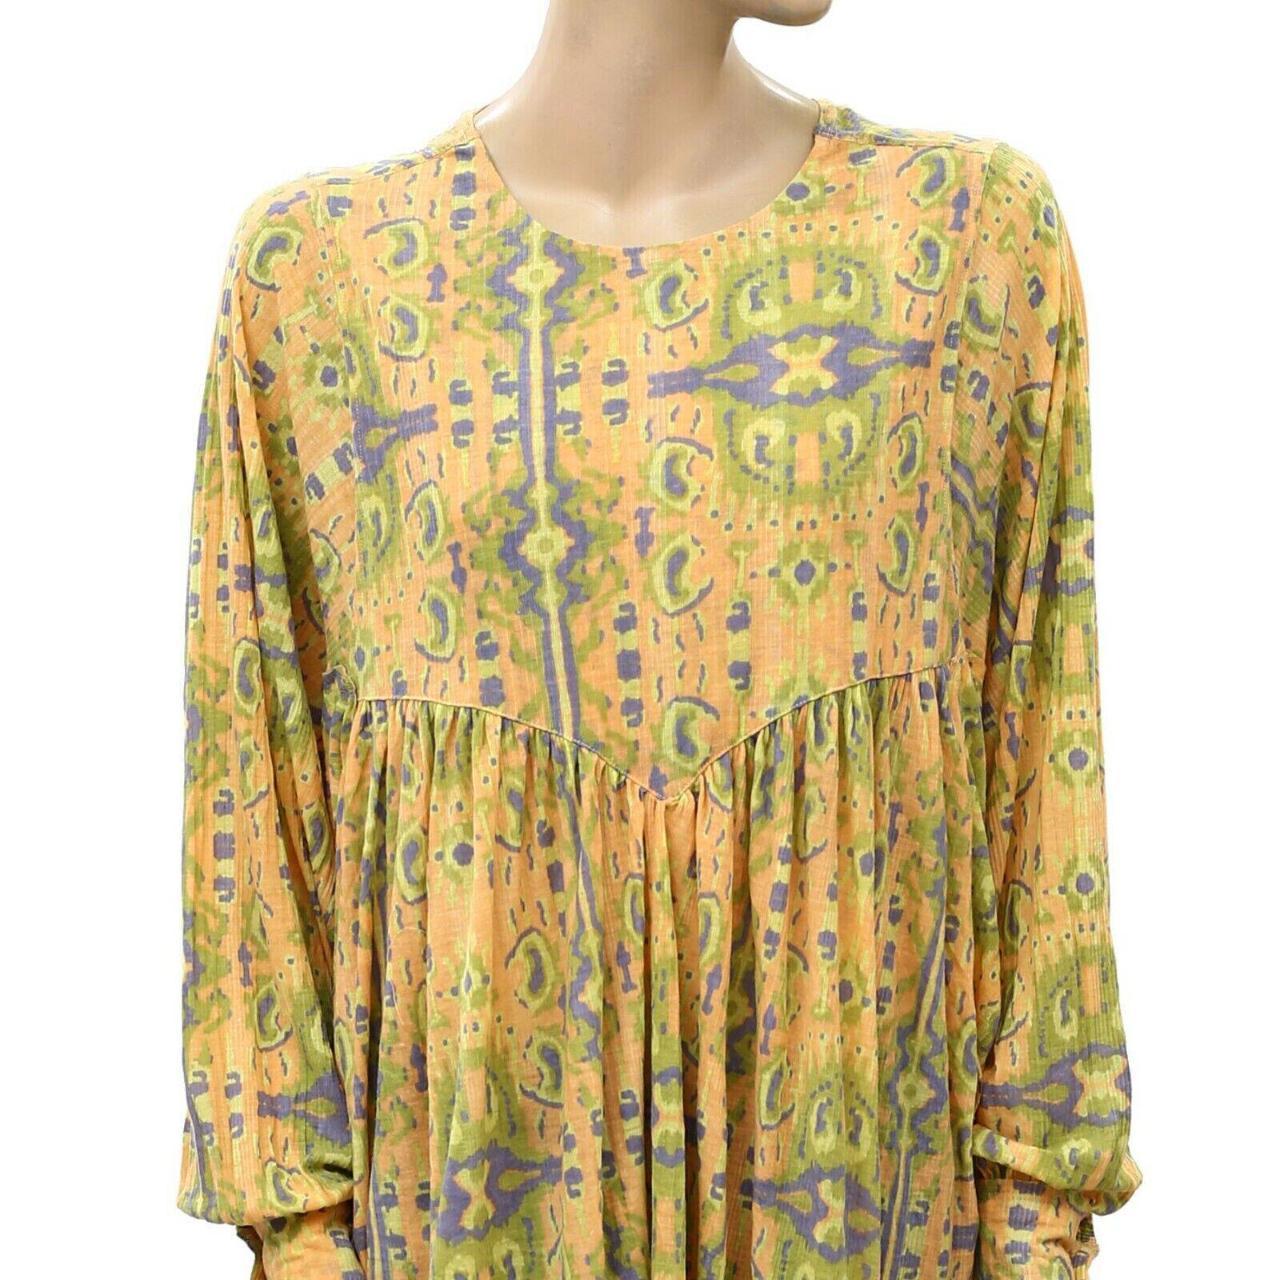 Free People This Is It Tunic Top Sun Faded Printed... - Depop